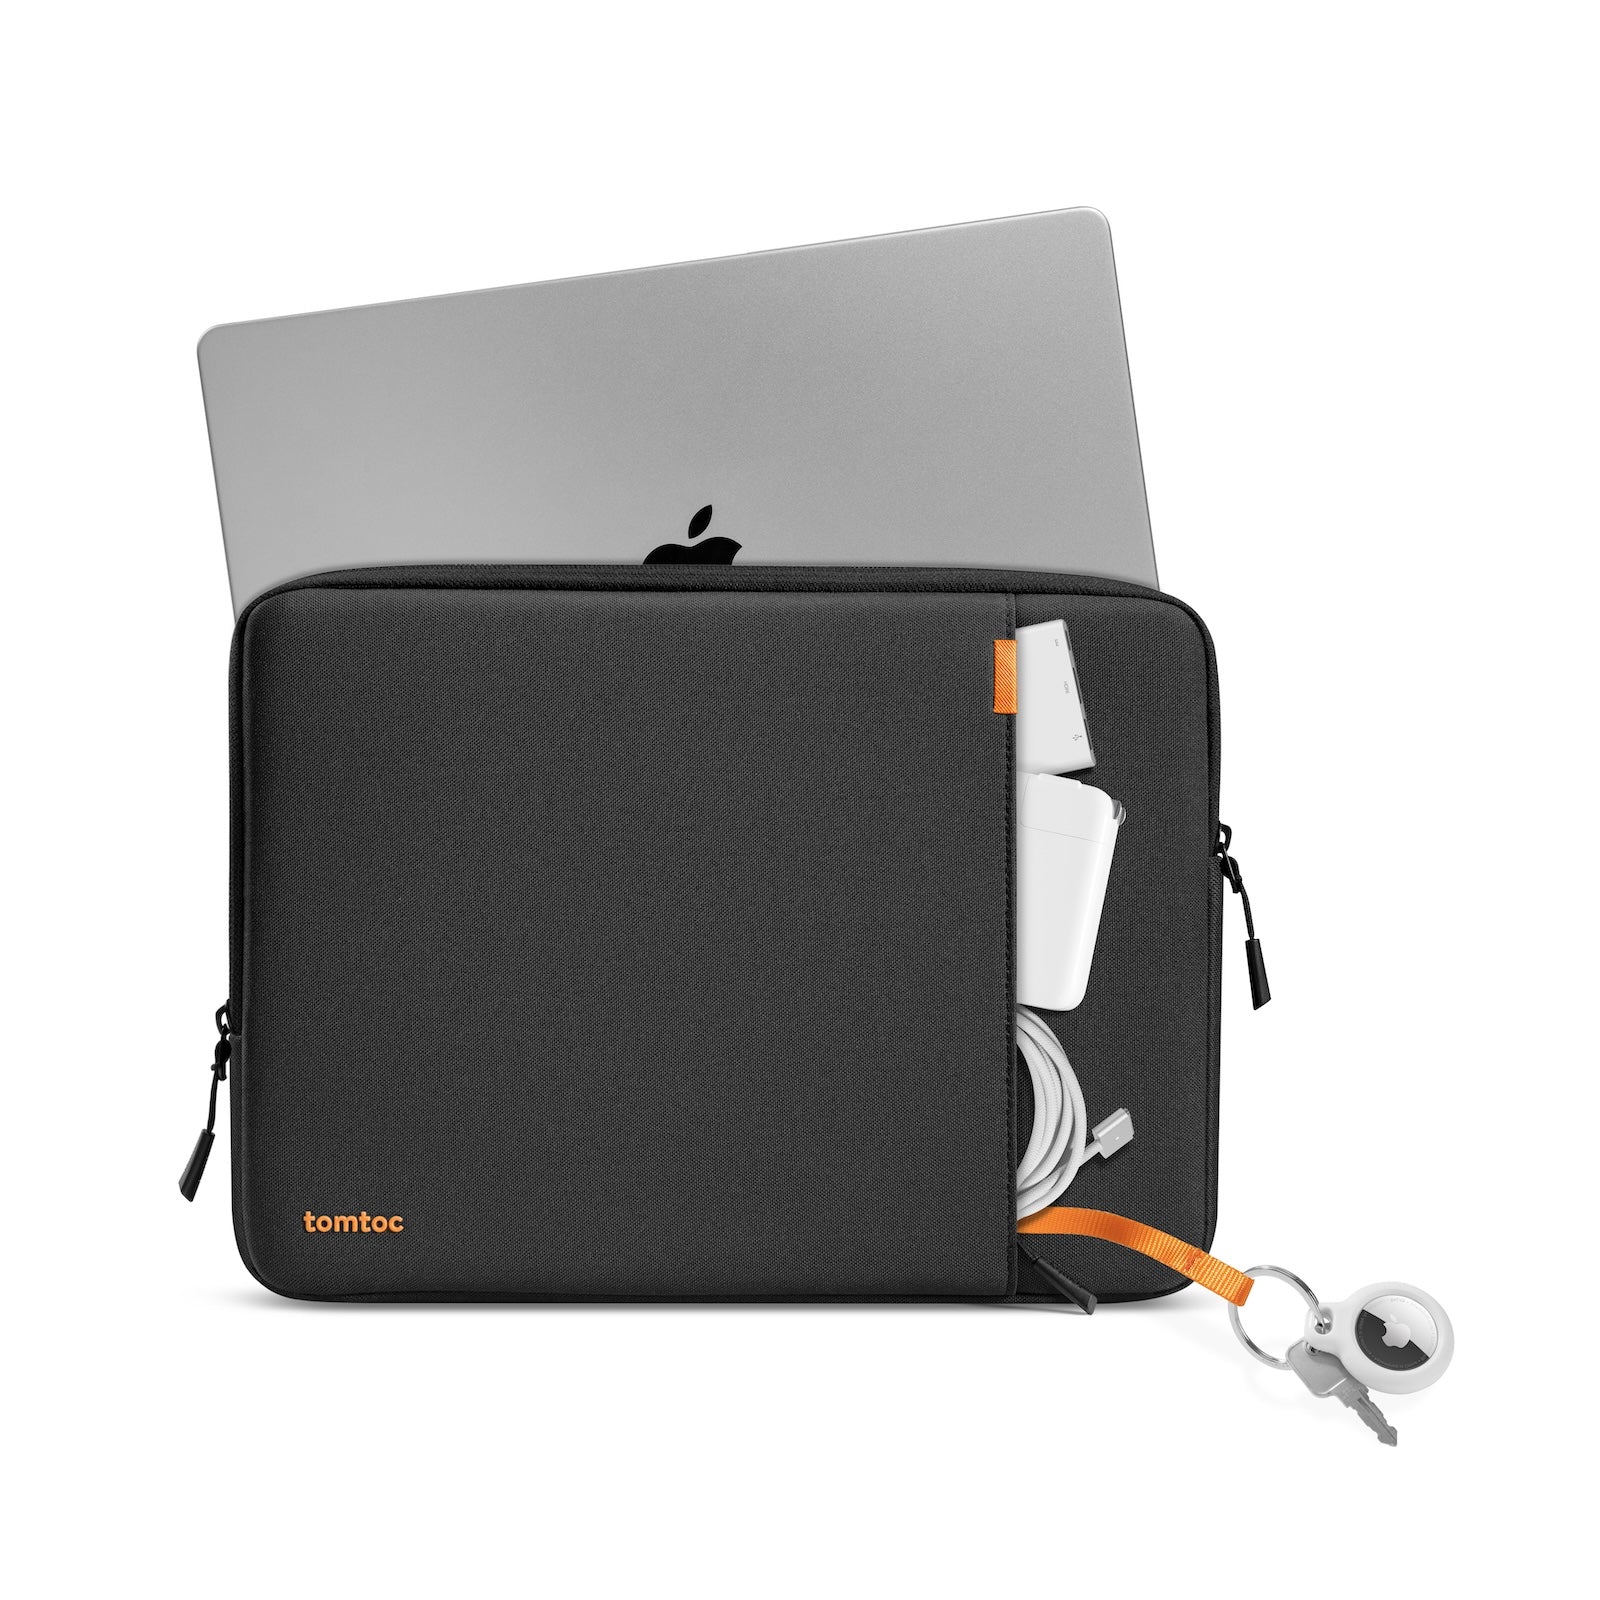 tomtoc Defender A13 Laptop Sleeve - 14inch